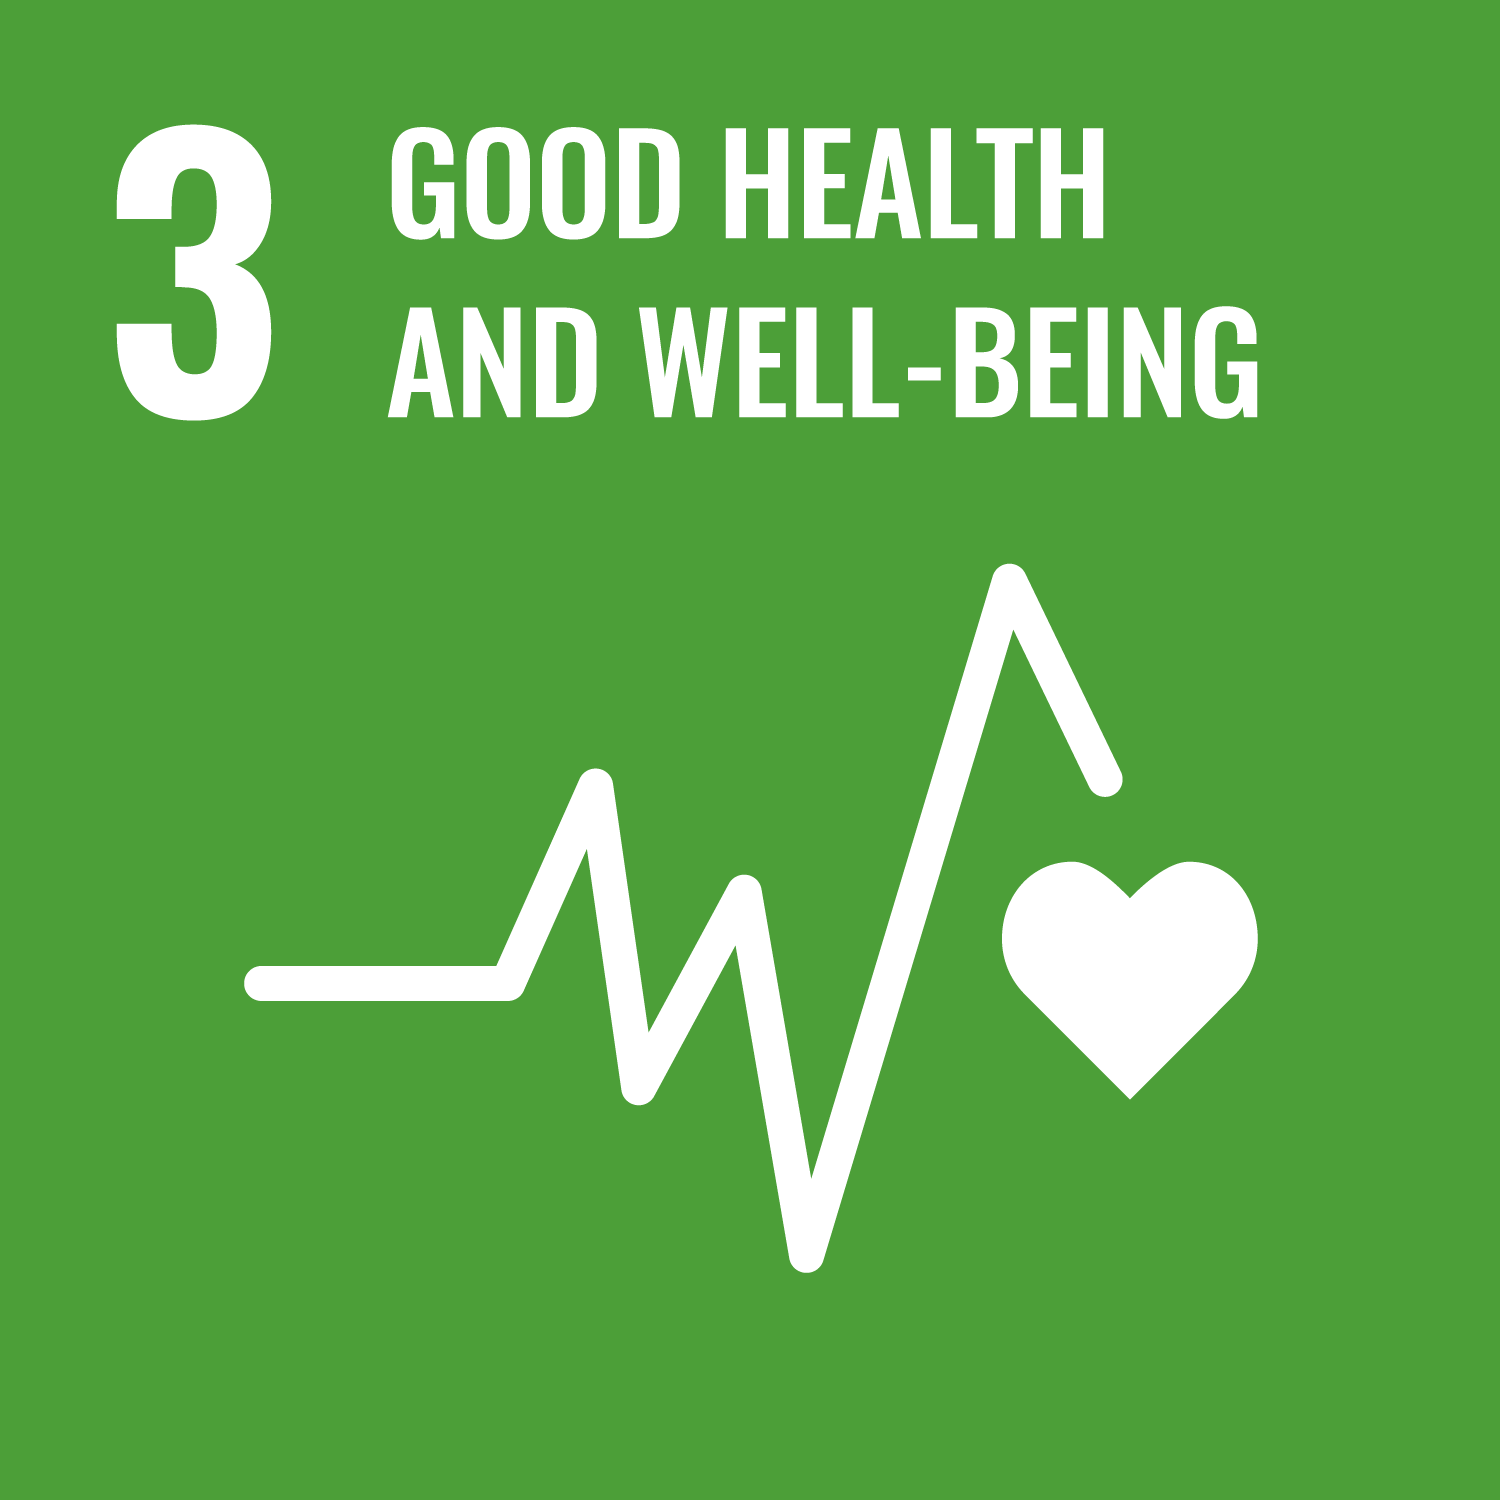 SDGs 03 Good Health and Well-Being